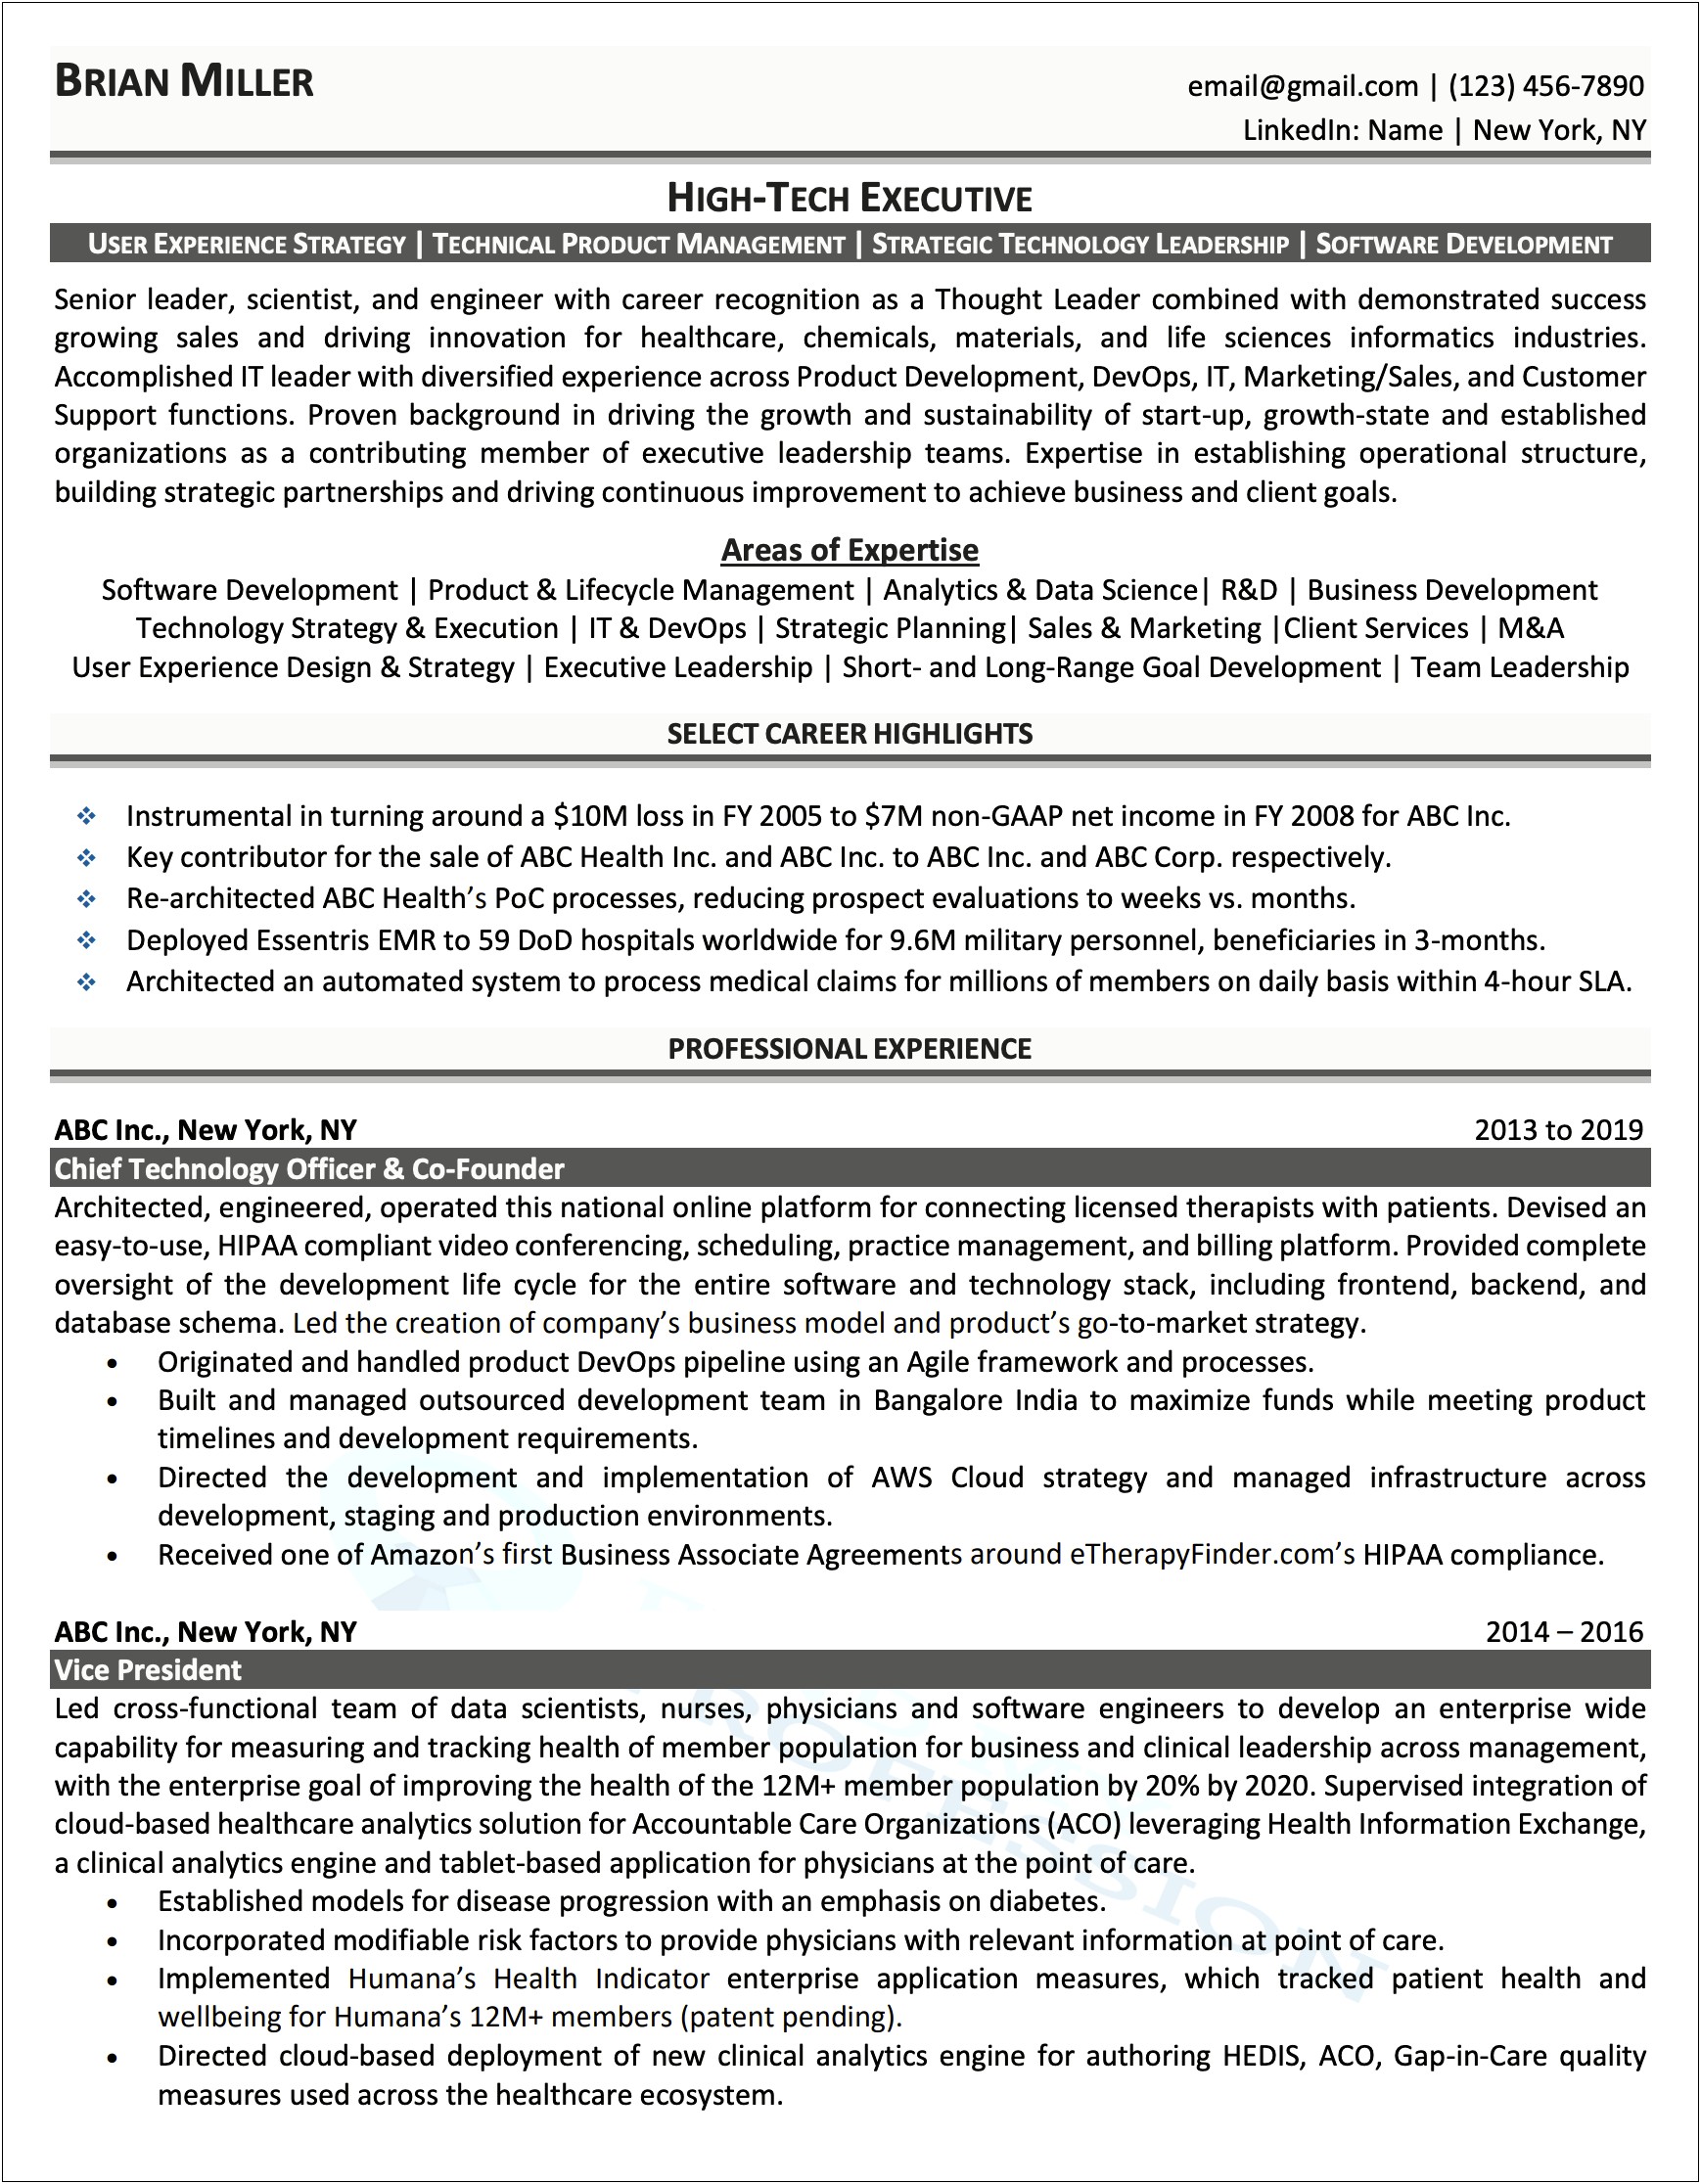 Summary Of Qualifications Vice President Resume